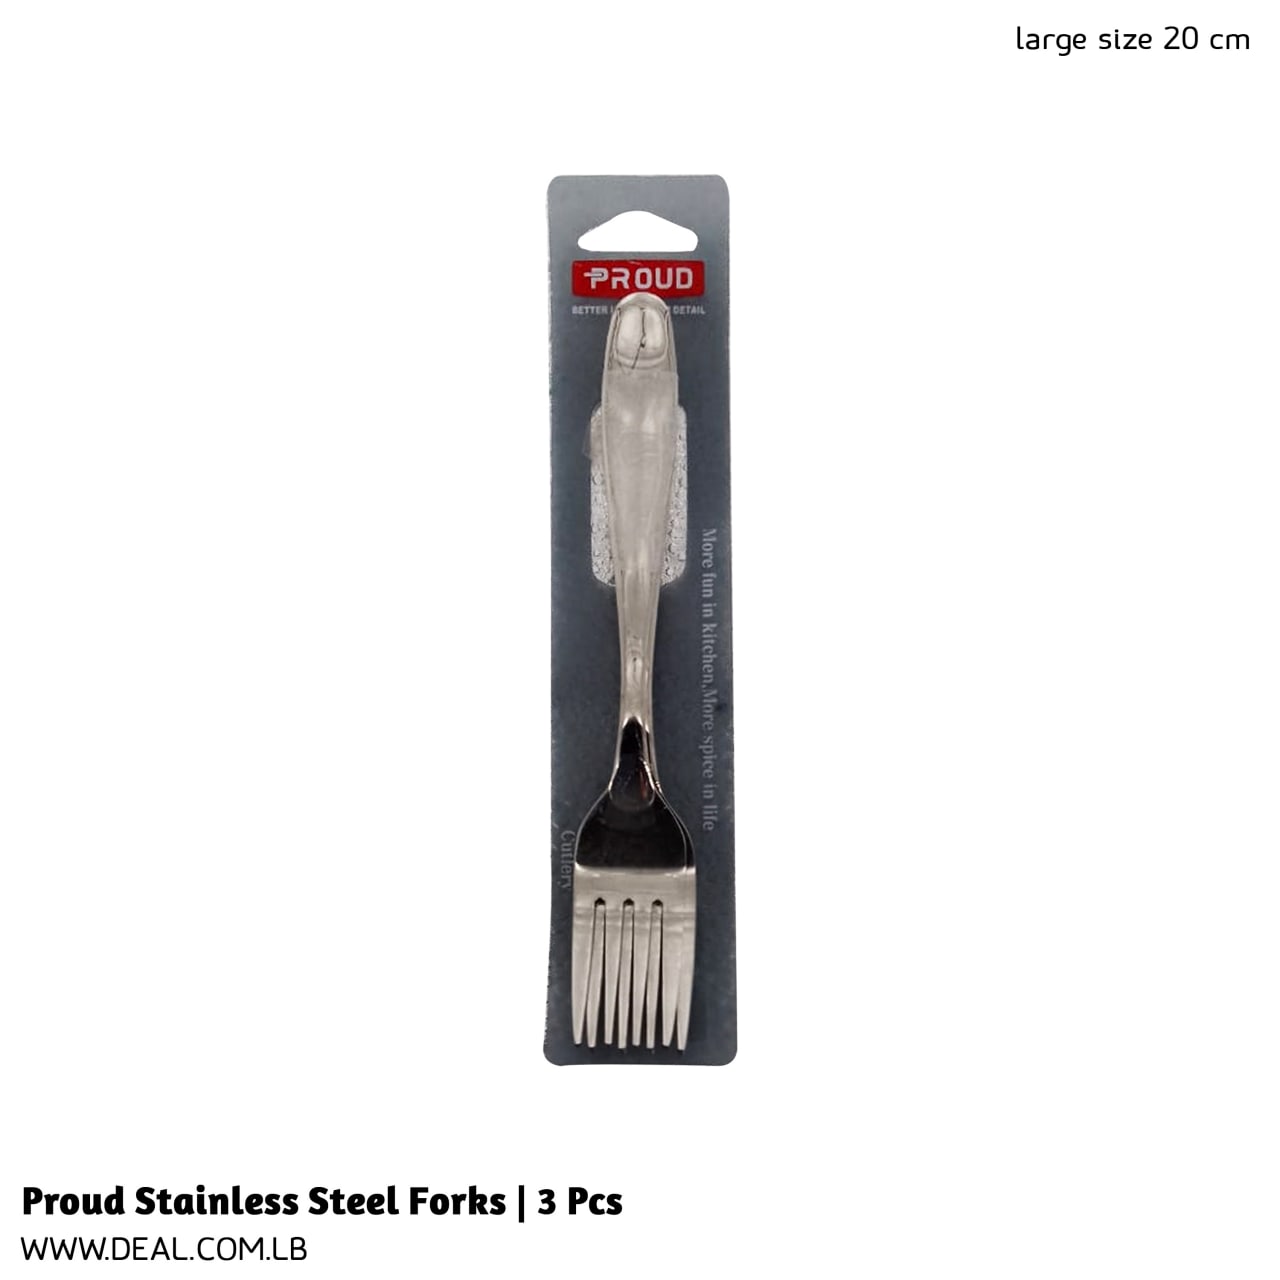 Proud+Stainless+Steel+Forks+%7C+3+Pcs